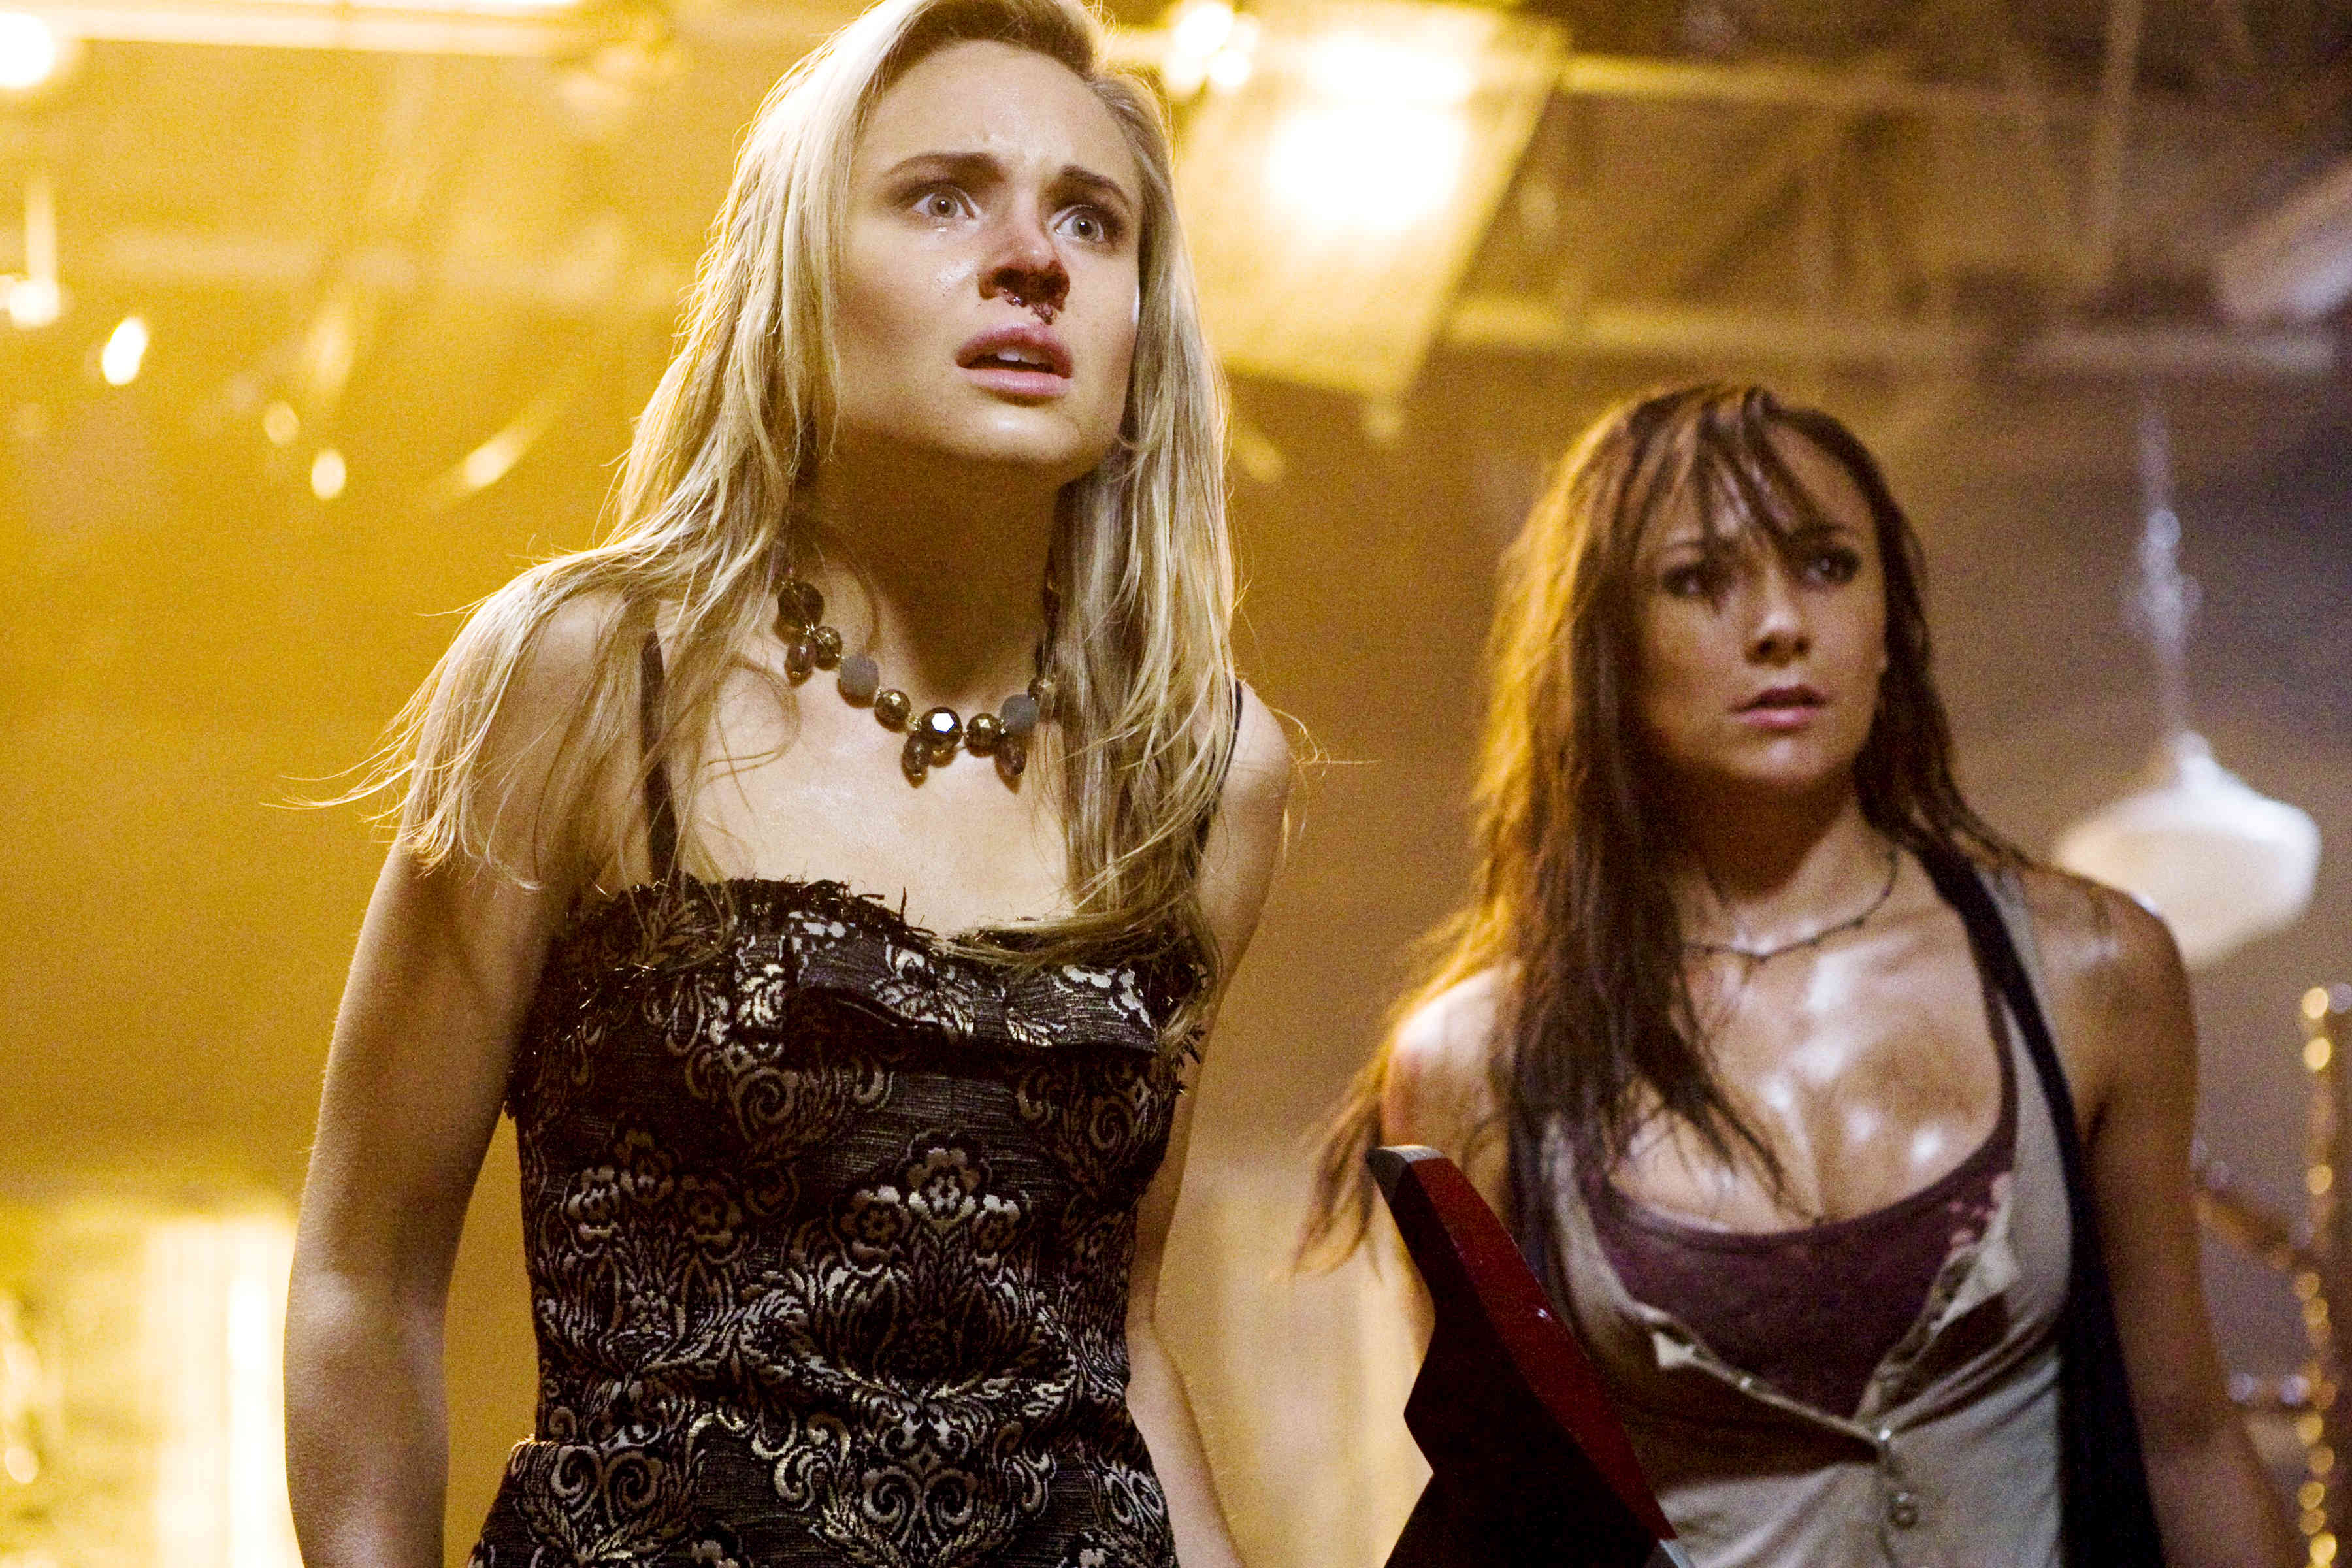 Leah Pipes stars as Jessica and Briana Evigan stars as Cassidy in Summit Entertainment's Sorority Row (2009)